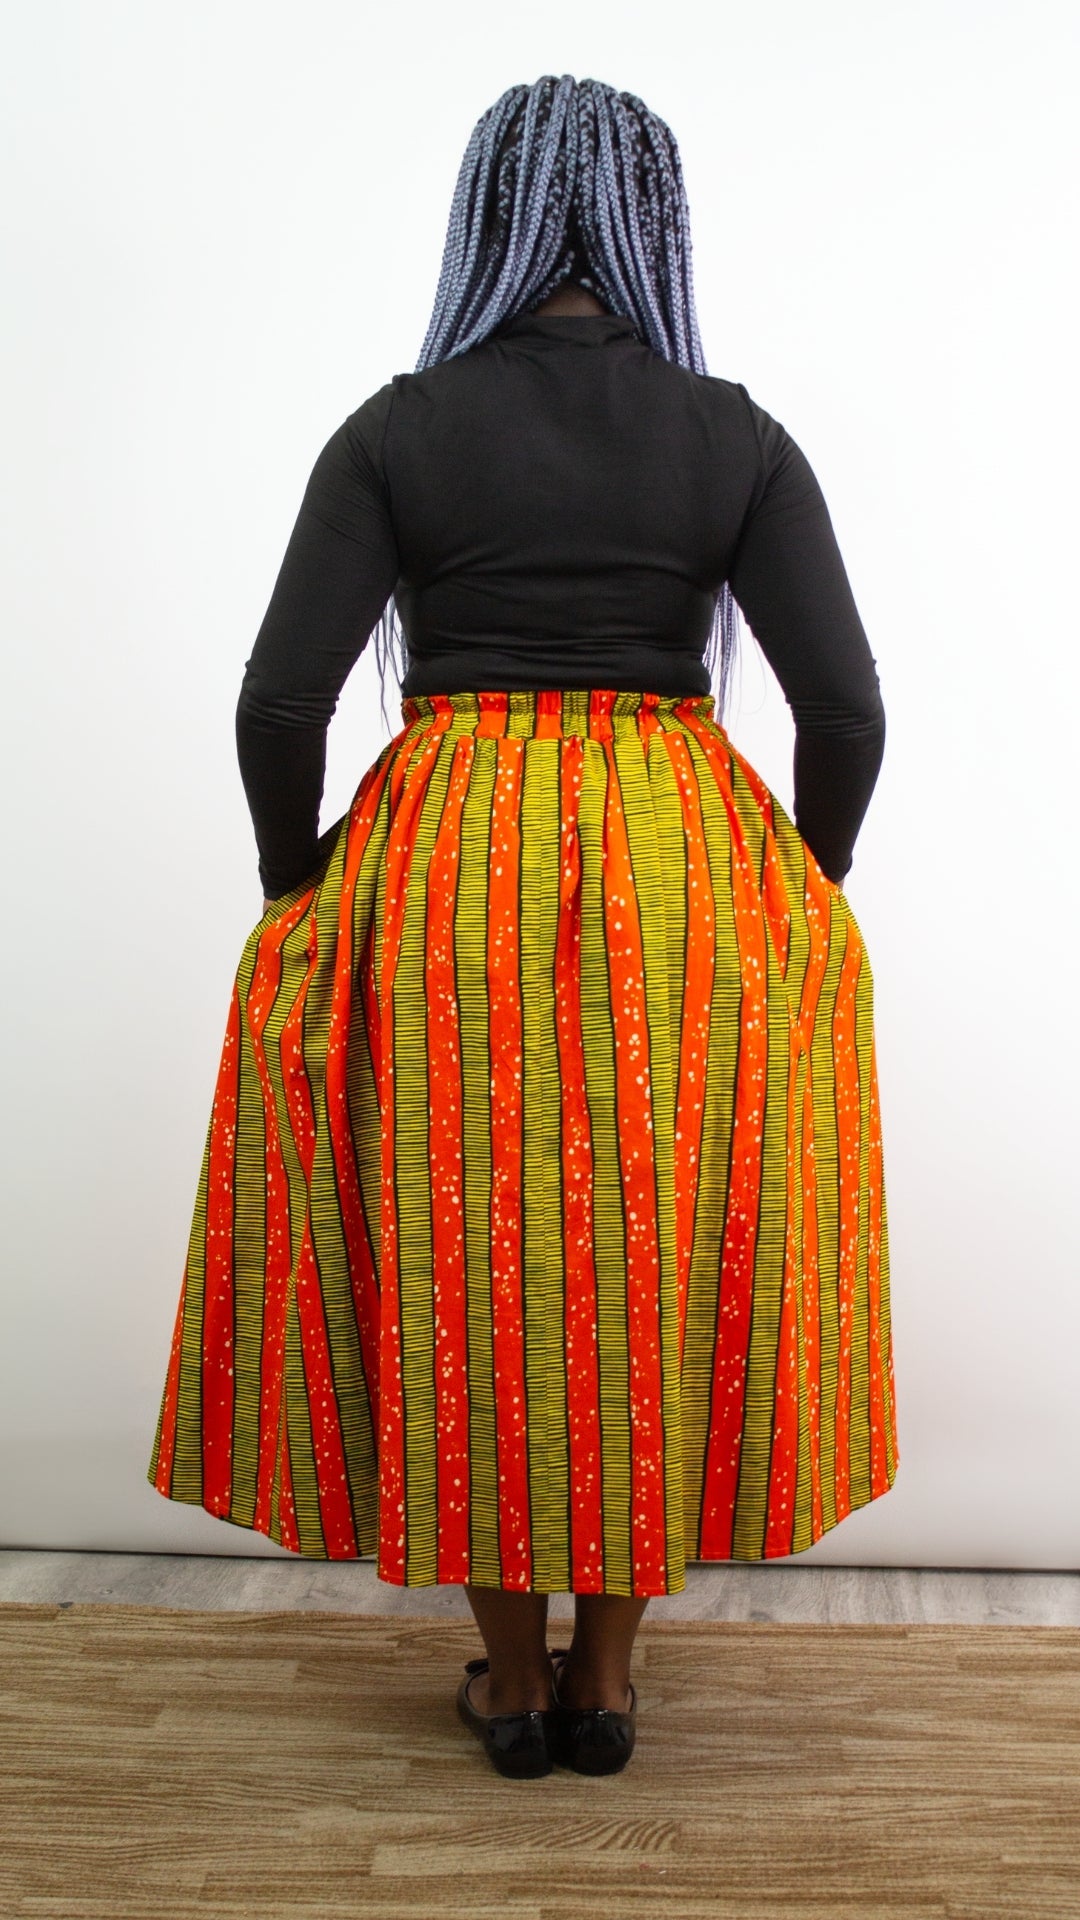 A full-body portrait capturing the back view of a person wearing a striking long orange and yellow skirt with a tie belt, complemented by a black top and stylish black ballet flats. 